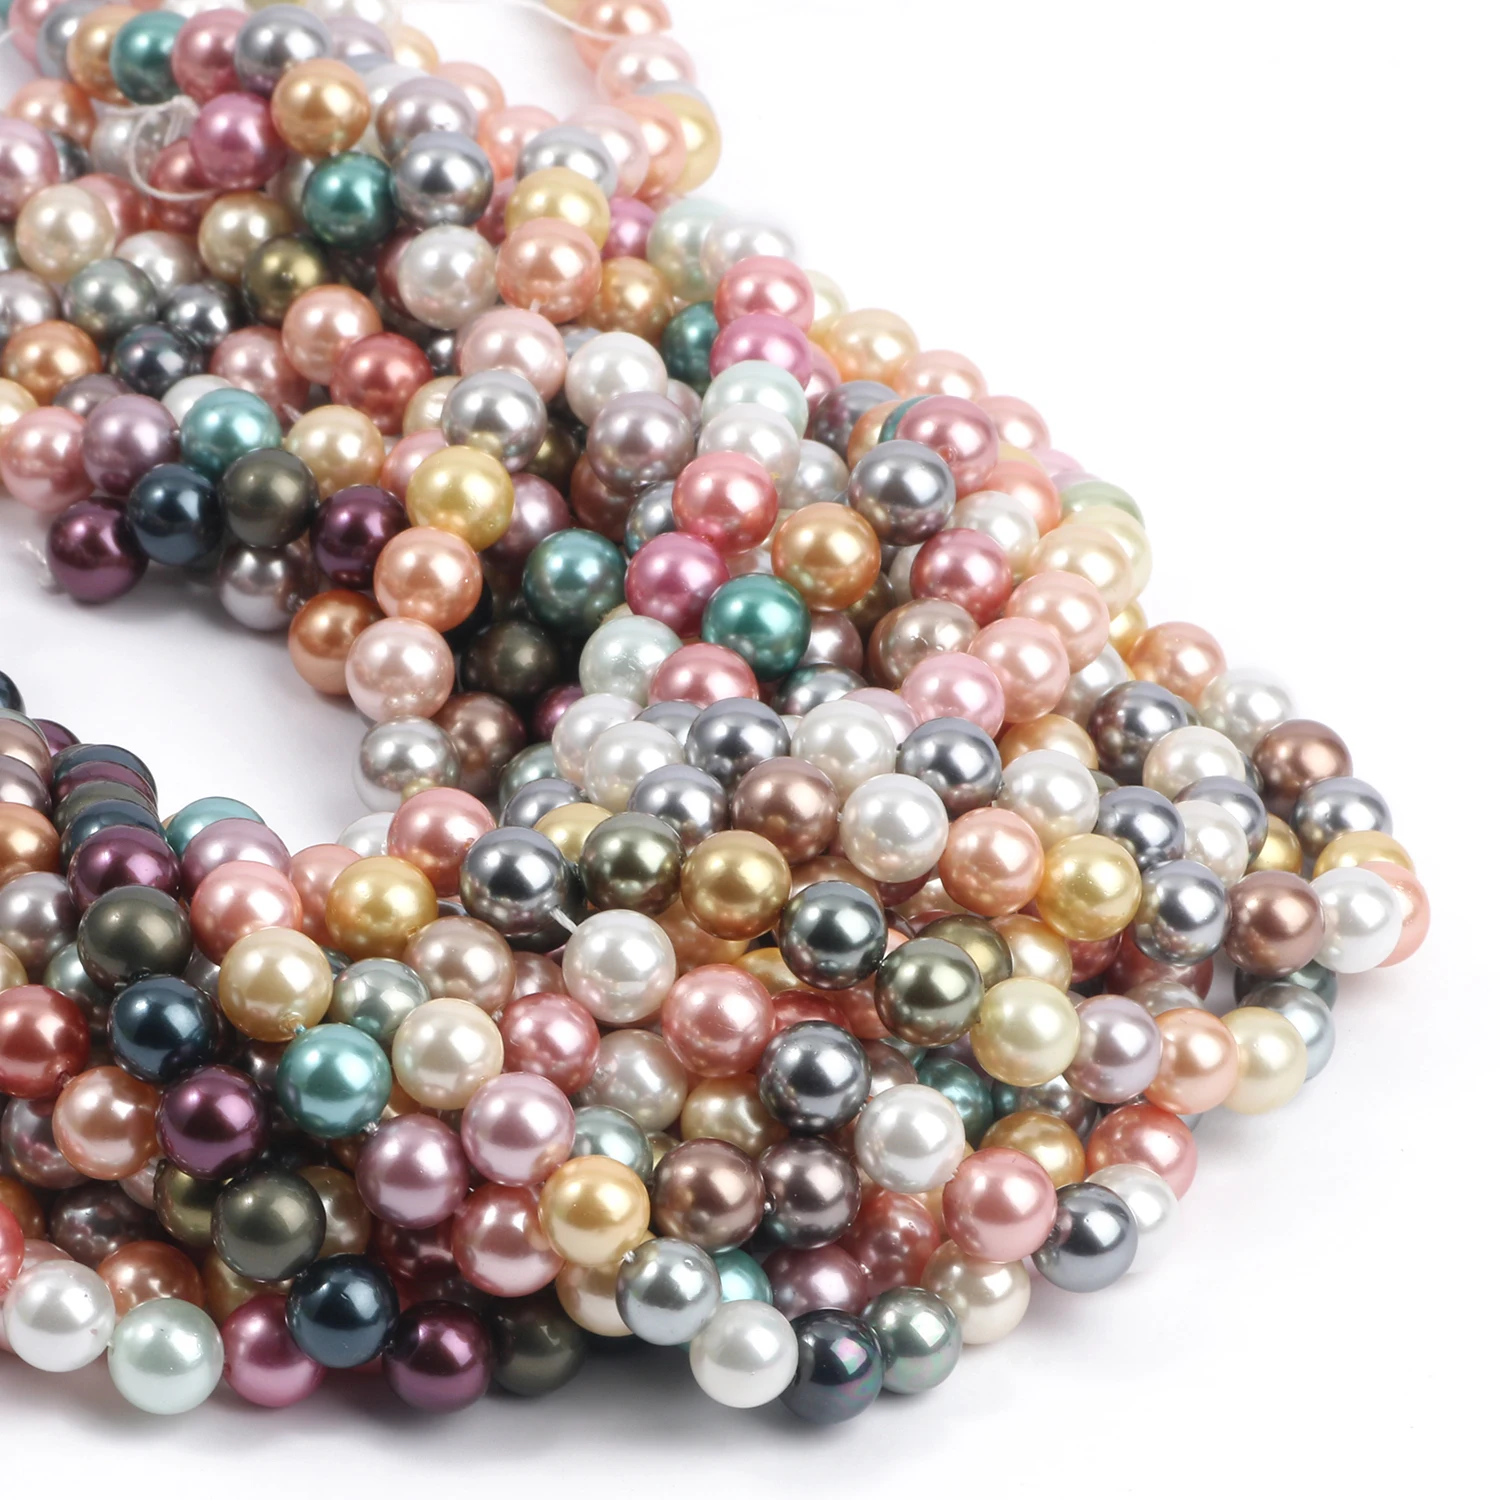 Wholesale Natural Cultured Freshwater Pearl Beads Strands 